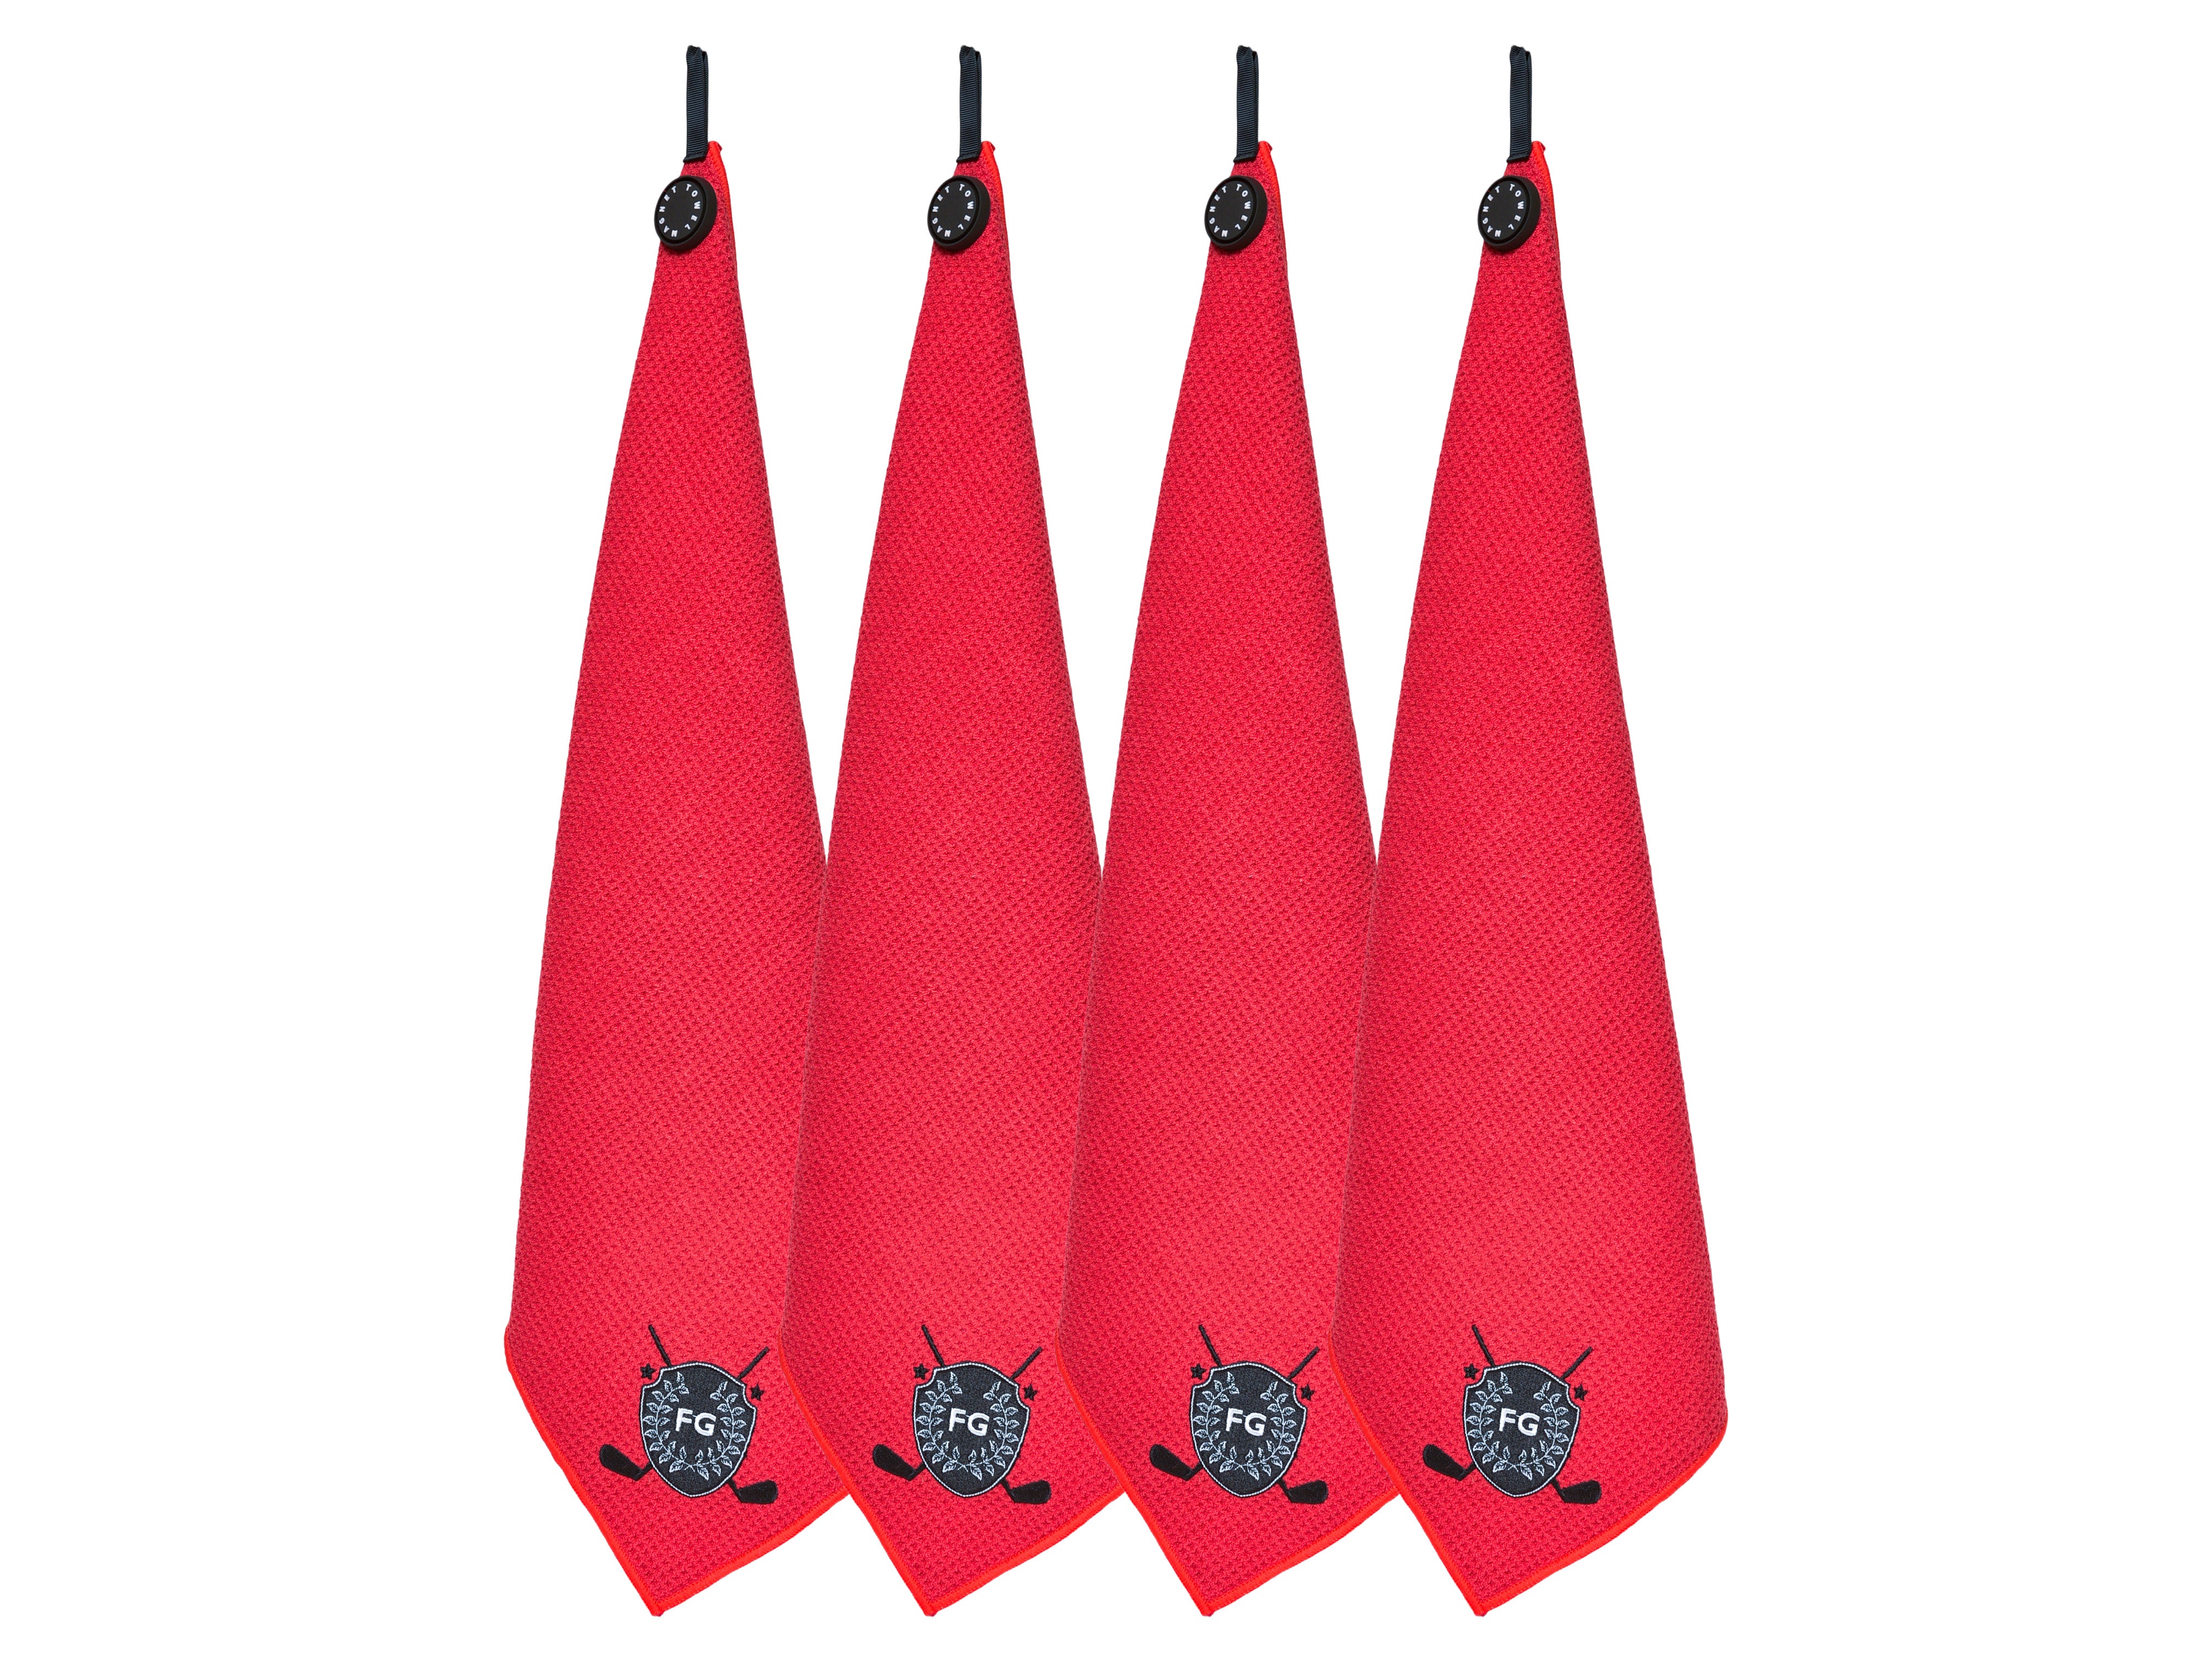 Fresco Golf Magnetic Towel Red 4-Pack